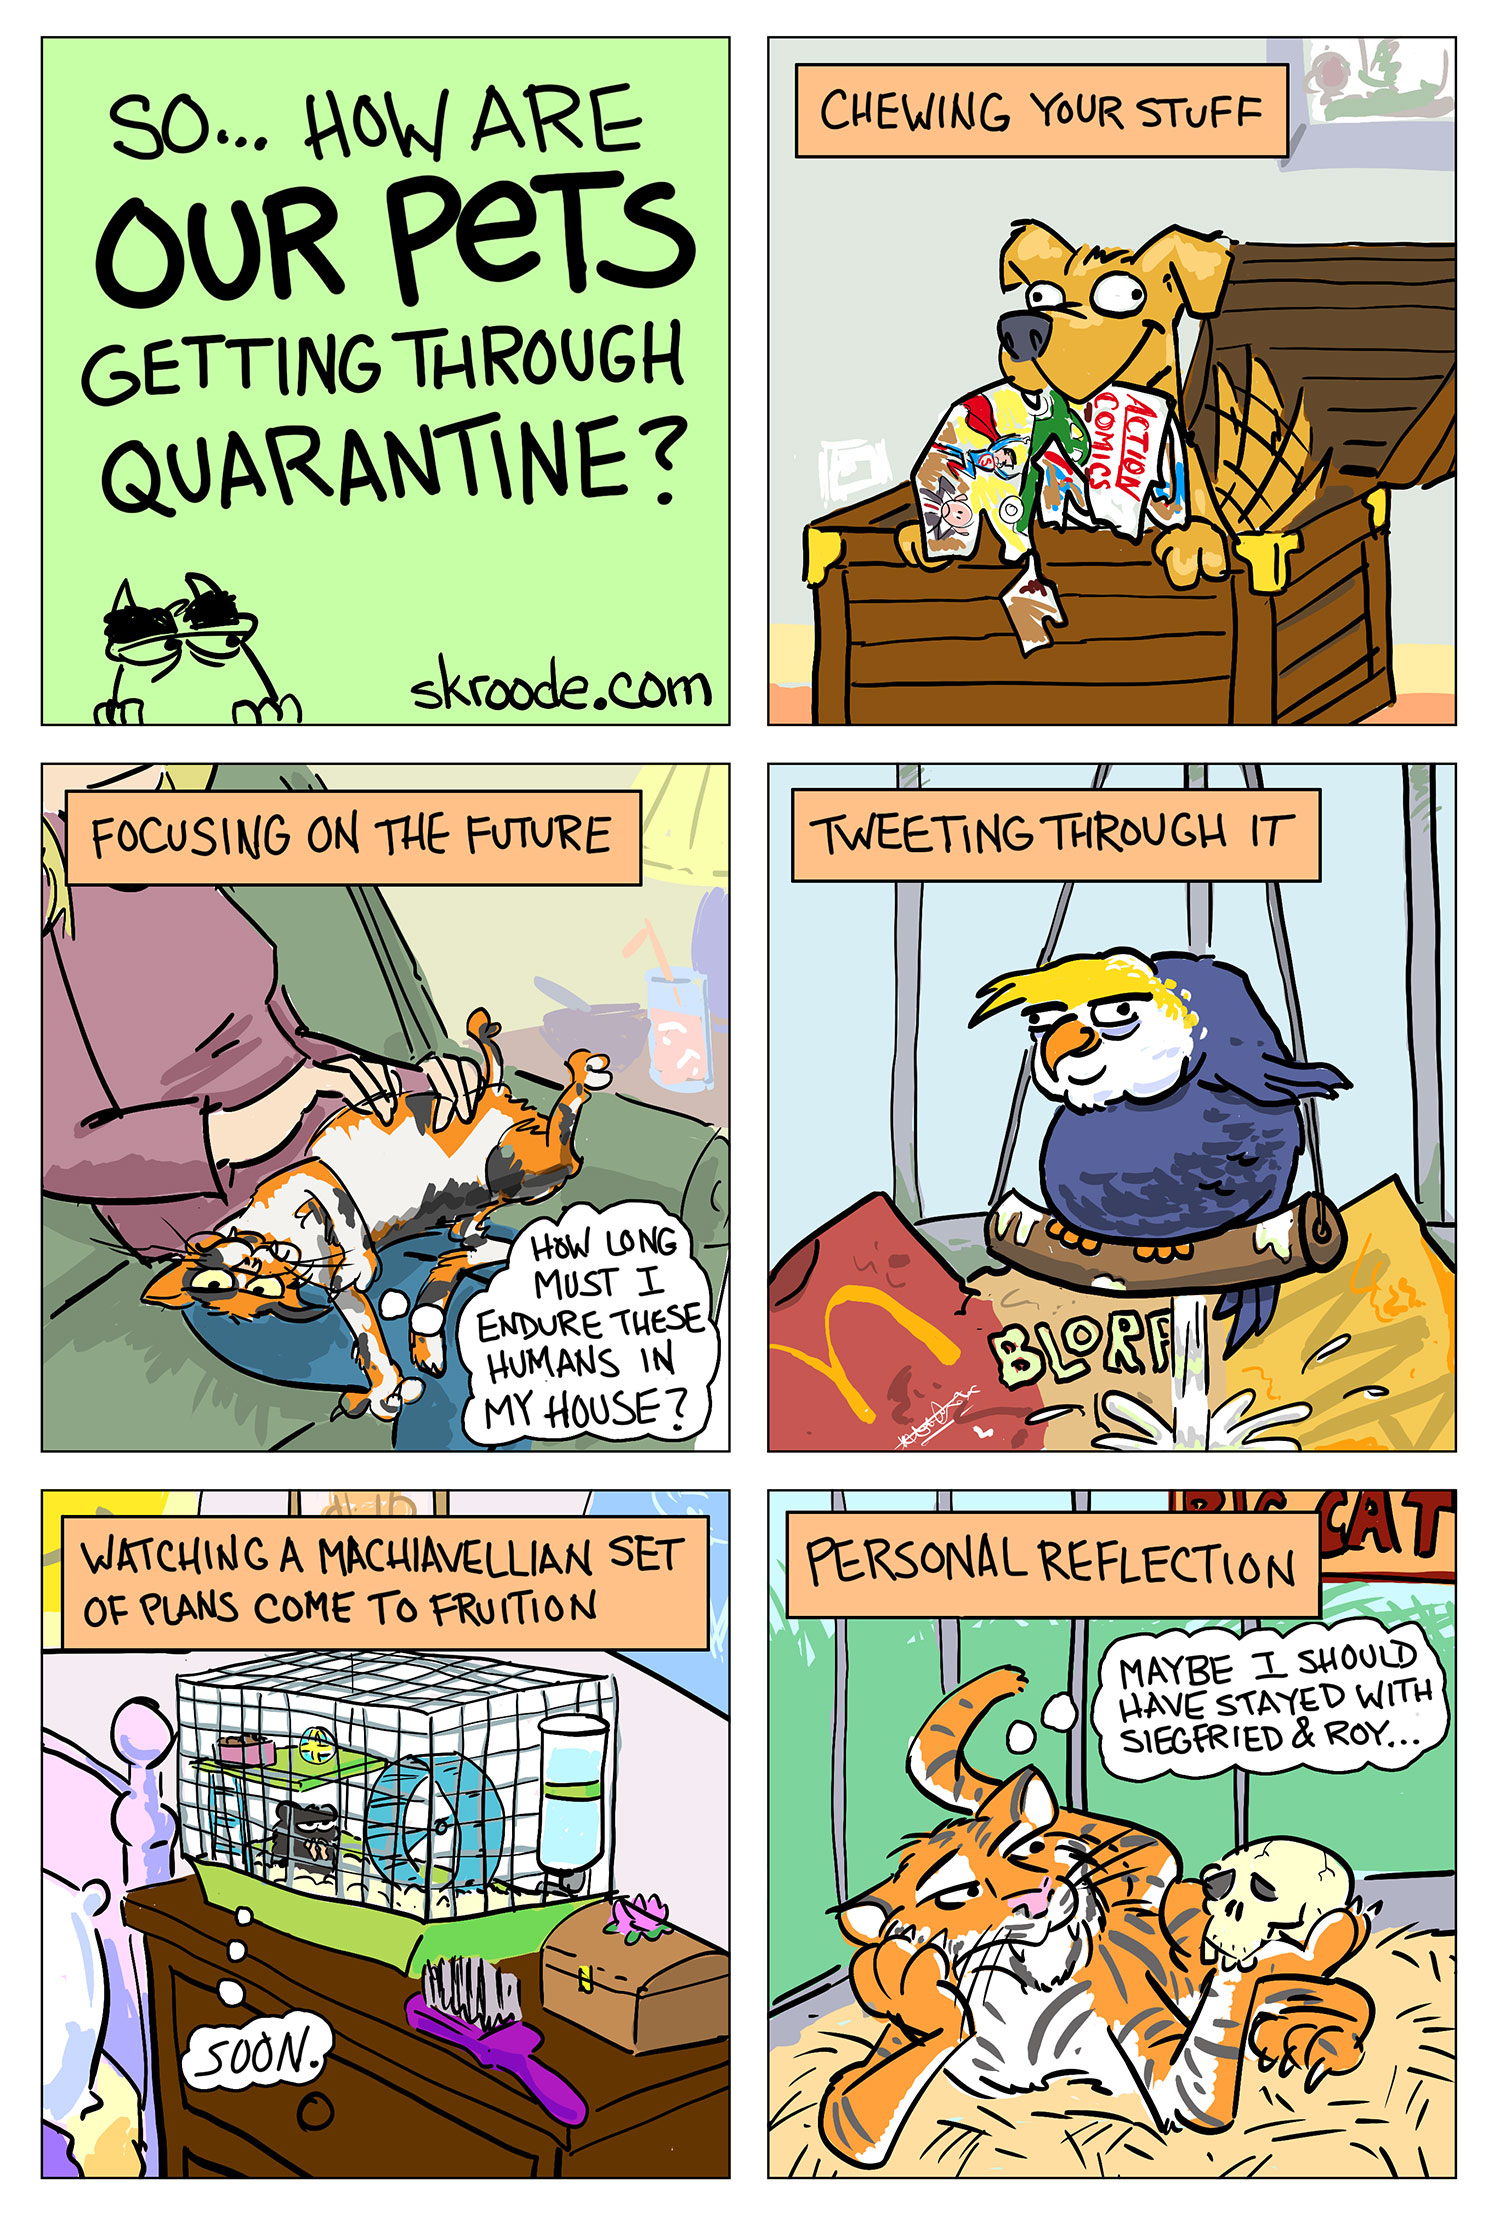 How are our pets getting through quarantine?